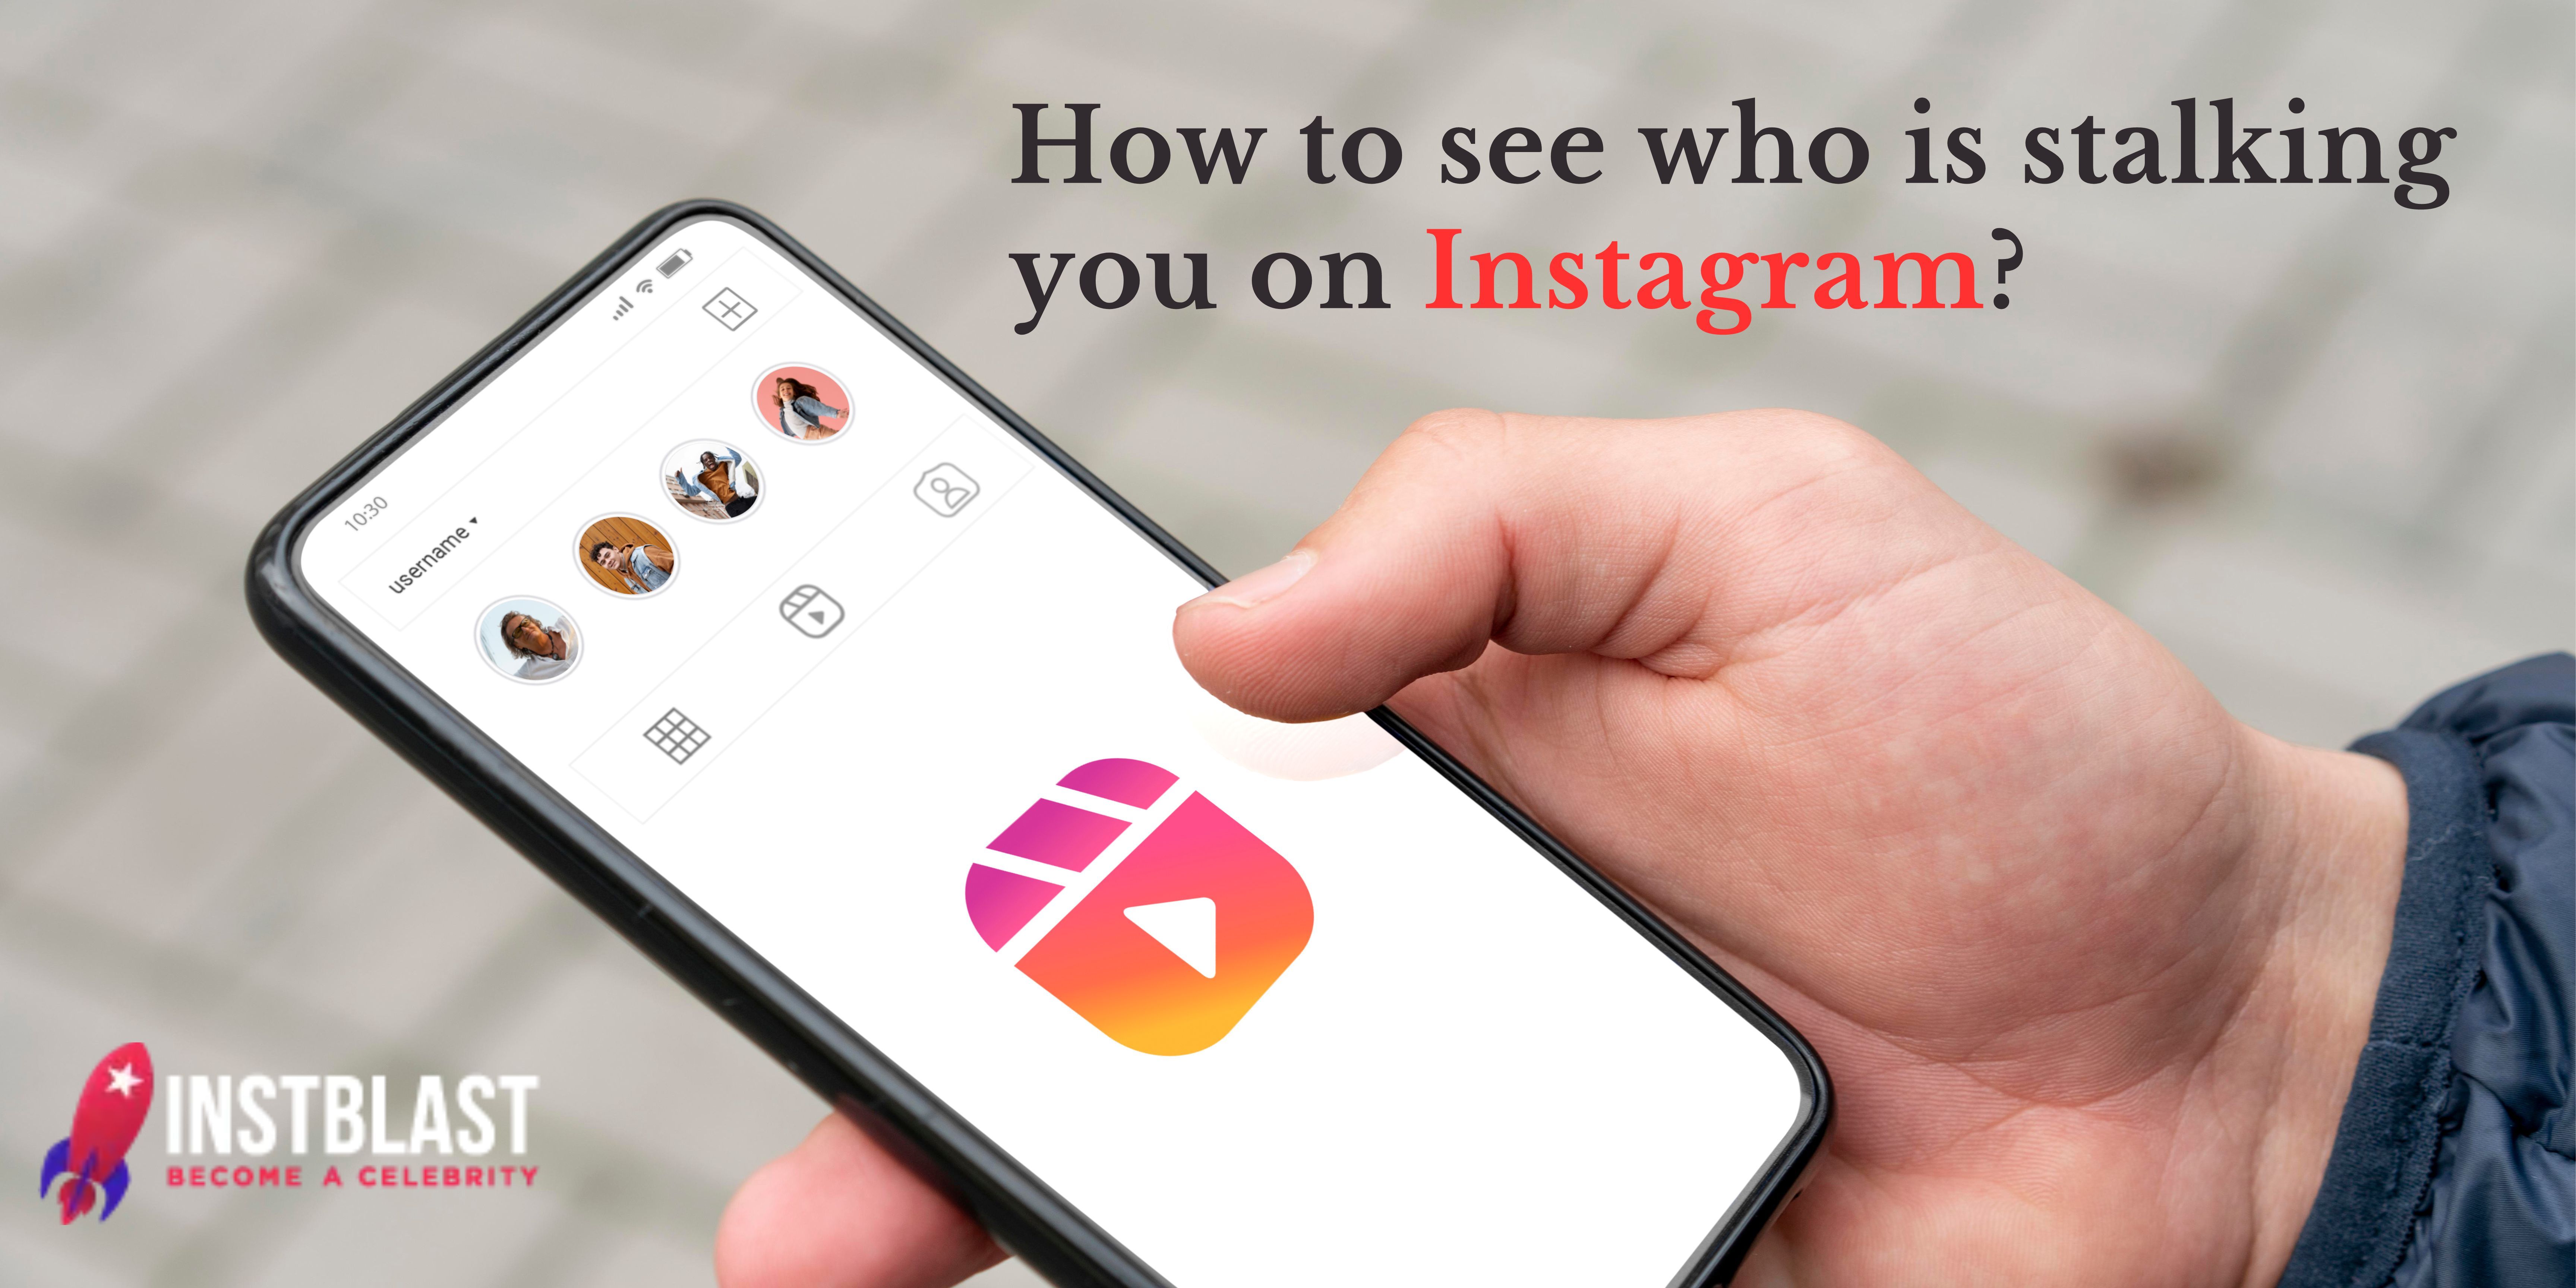 How To Check Who Is Stalking You On Instagram?